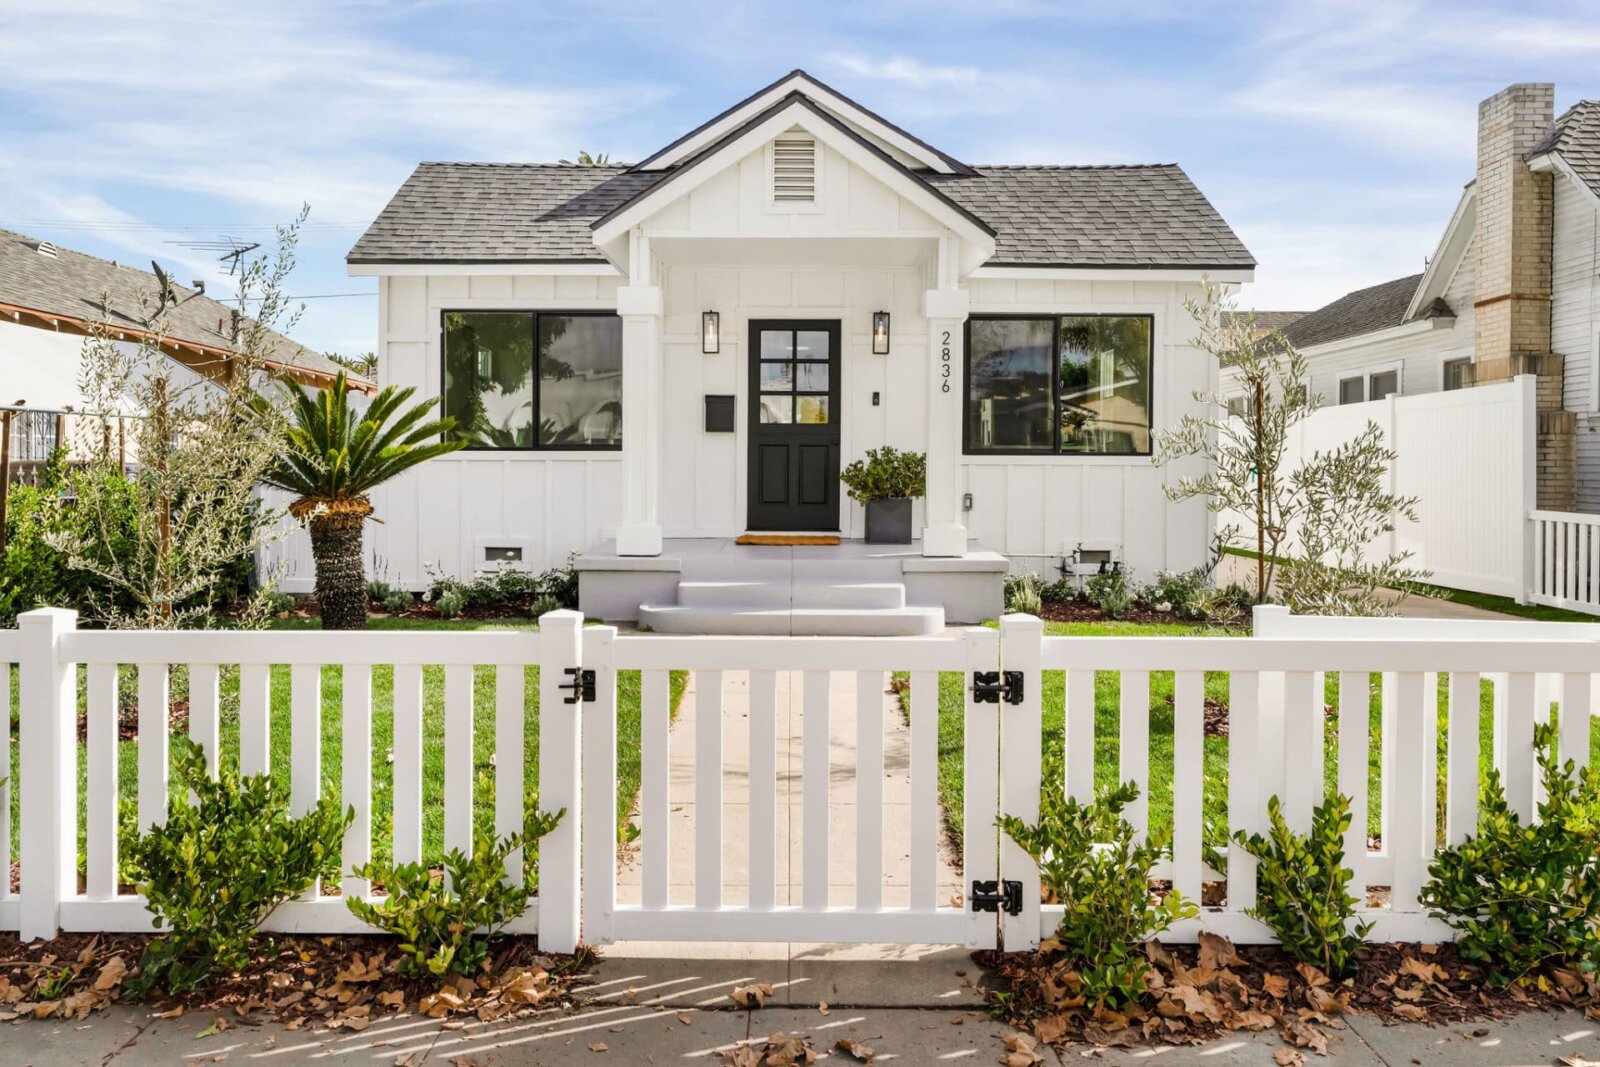 Modern farmhouse style home with white picket fence